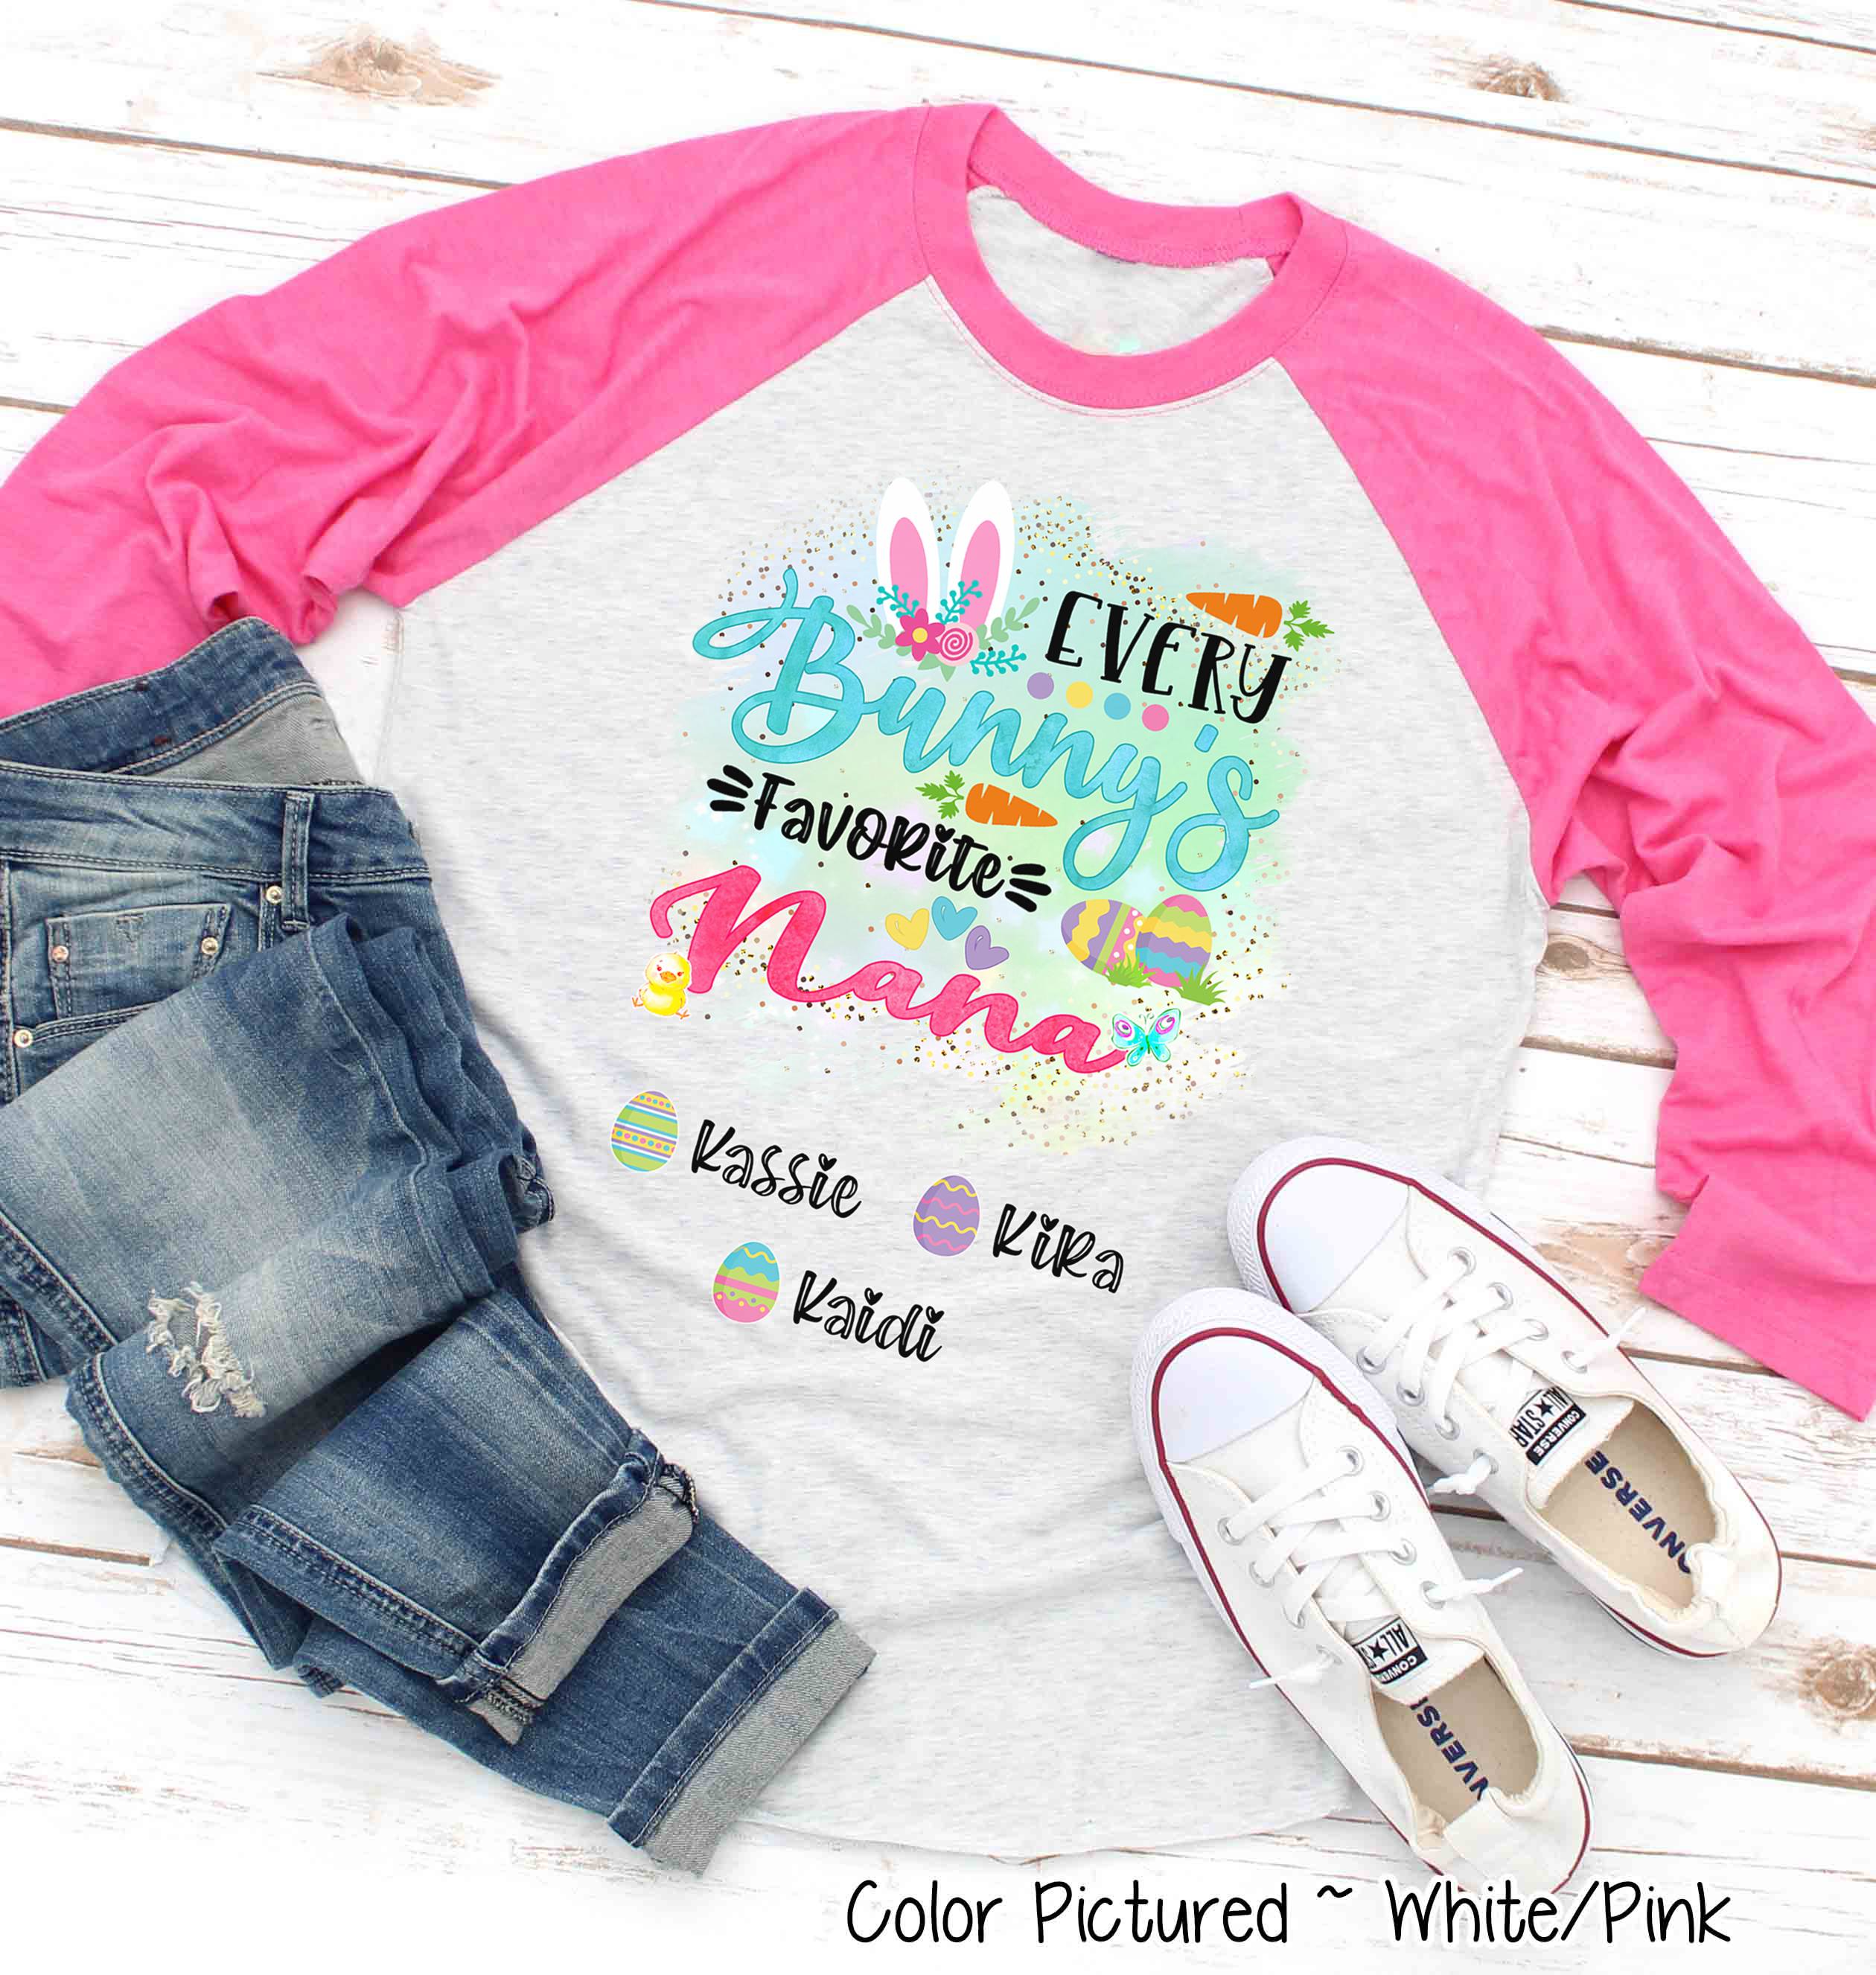 Personalized Shirt For Nana Every Bunny's Favorite & Easter Eggs with Custom Grandkids Name Easter Day Raglan Tee